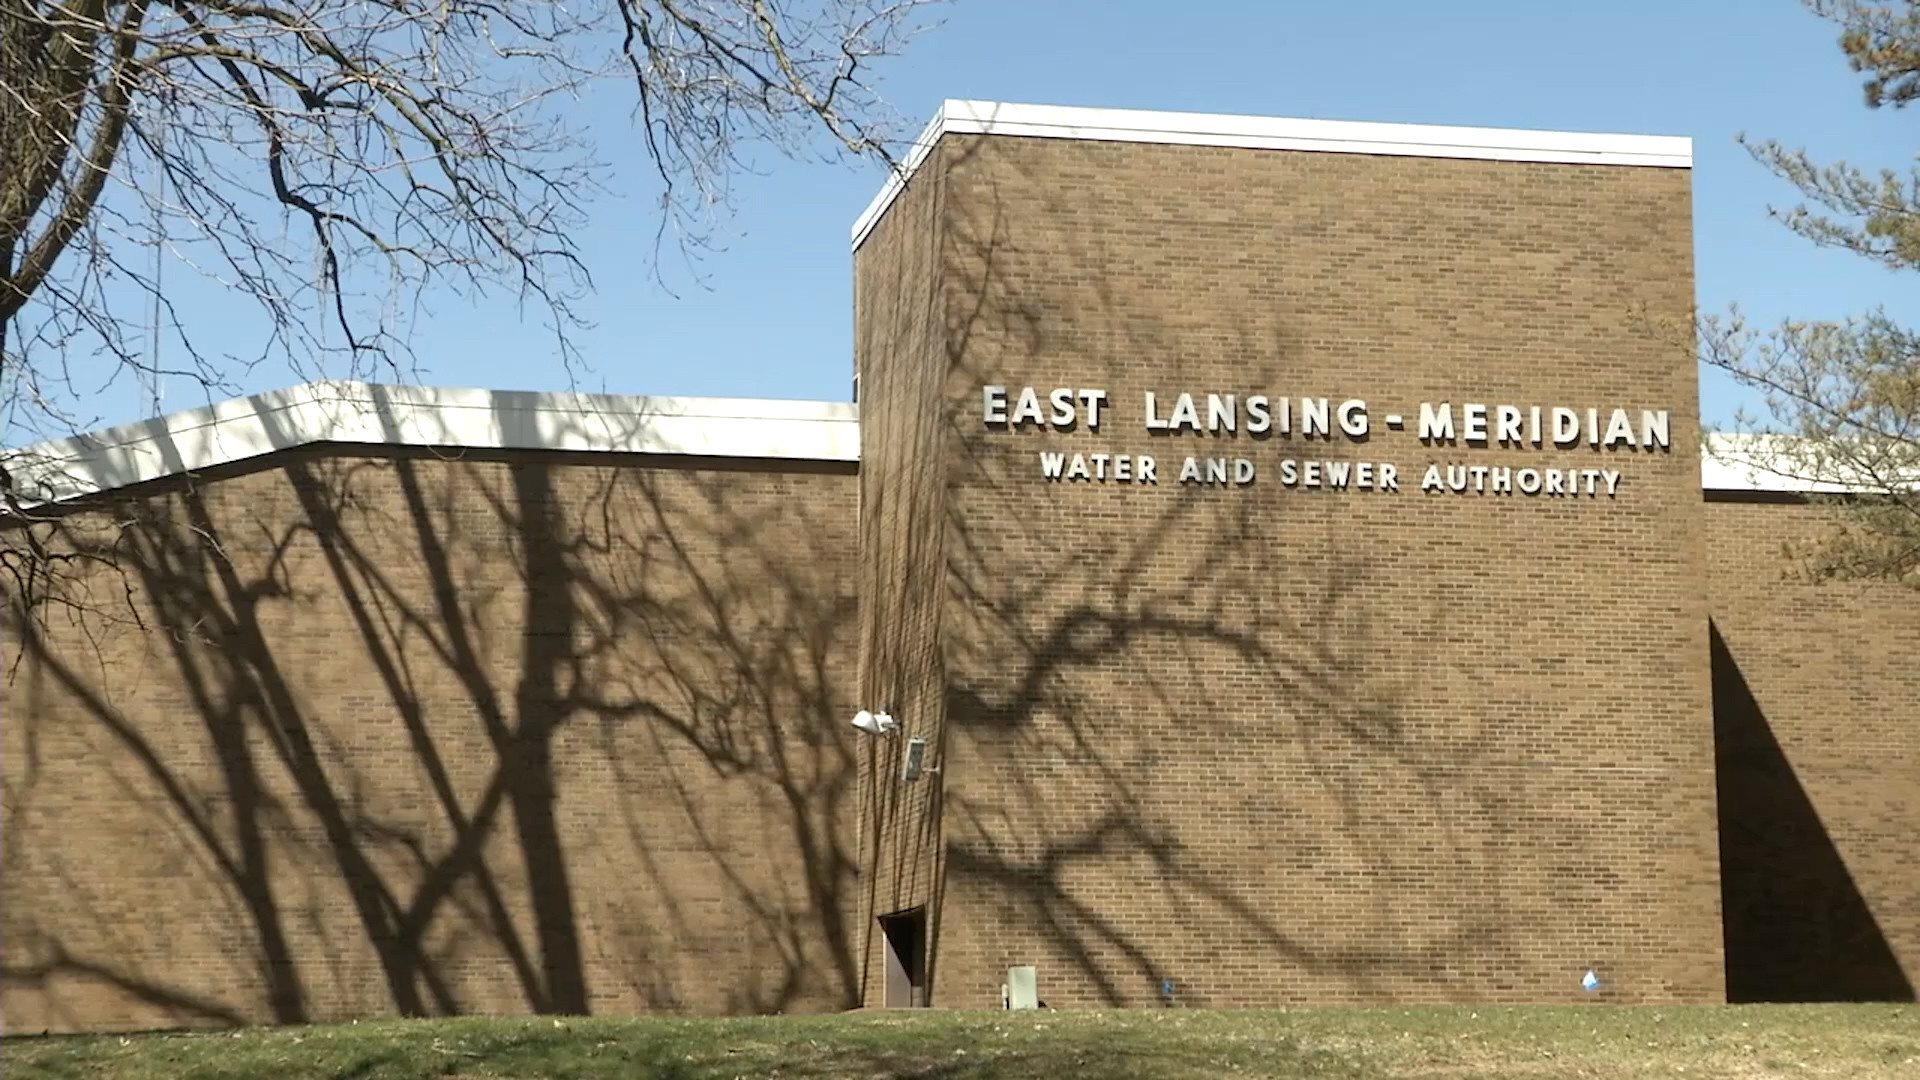 East Lansing - Meridian Water Quality Report: Findings and Takeaways